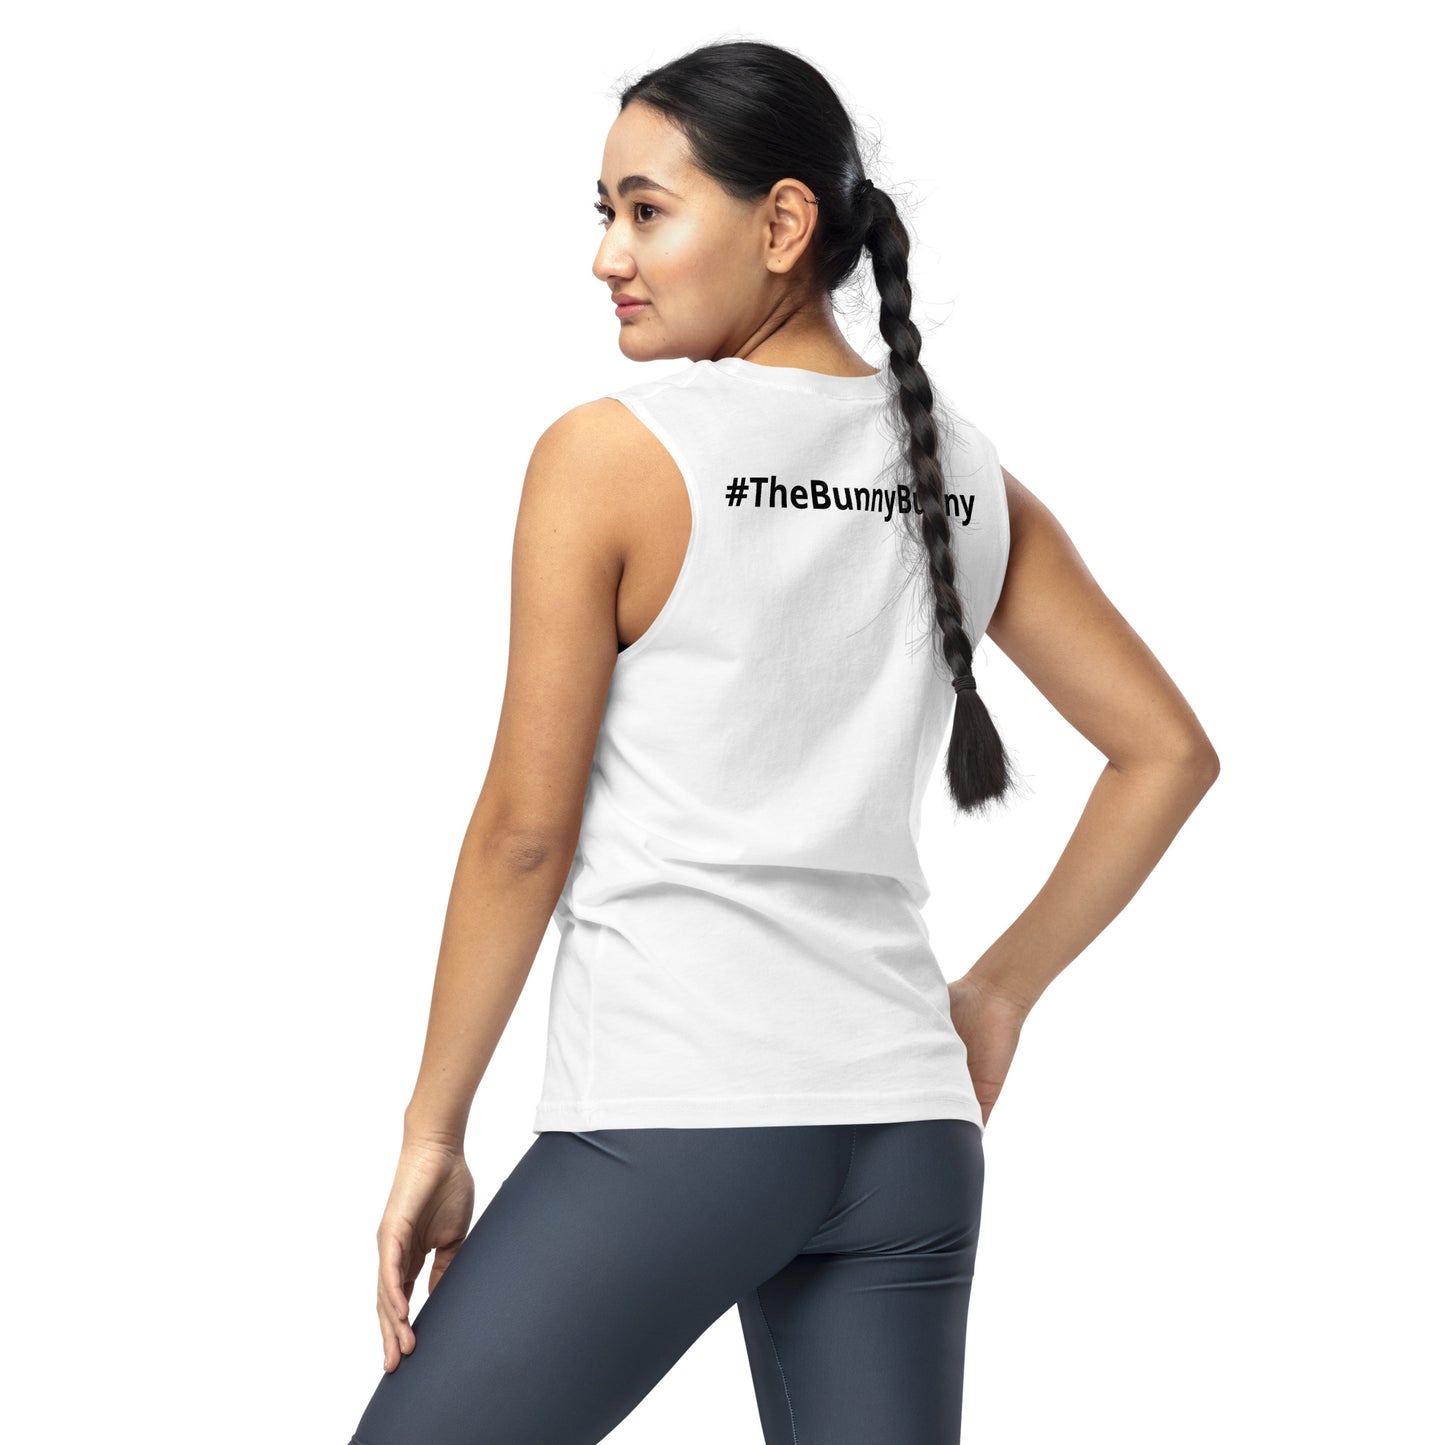 Unisex Muscle Shirt White with Black Writing and Leaderboard Name on Back